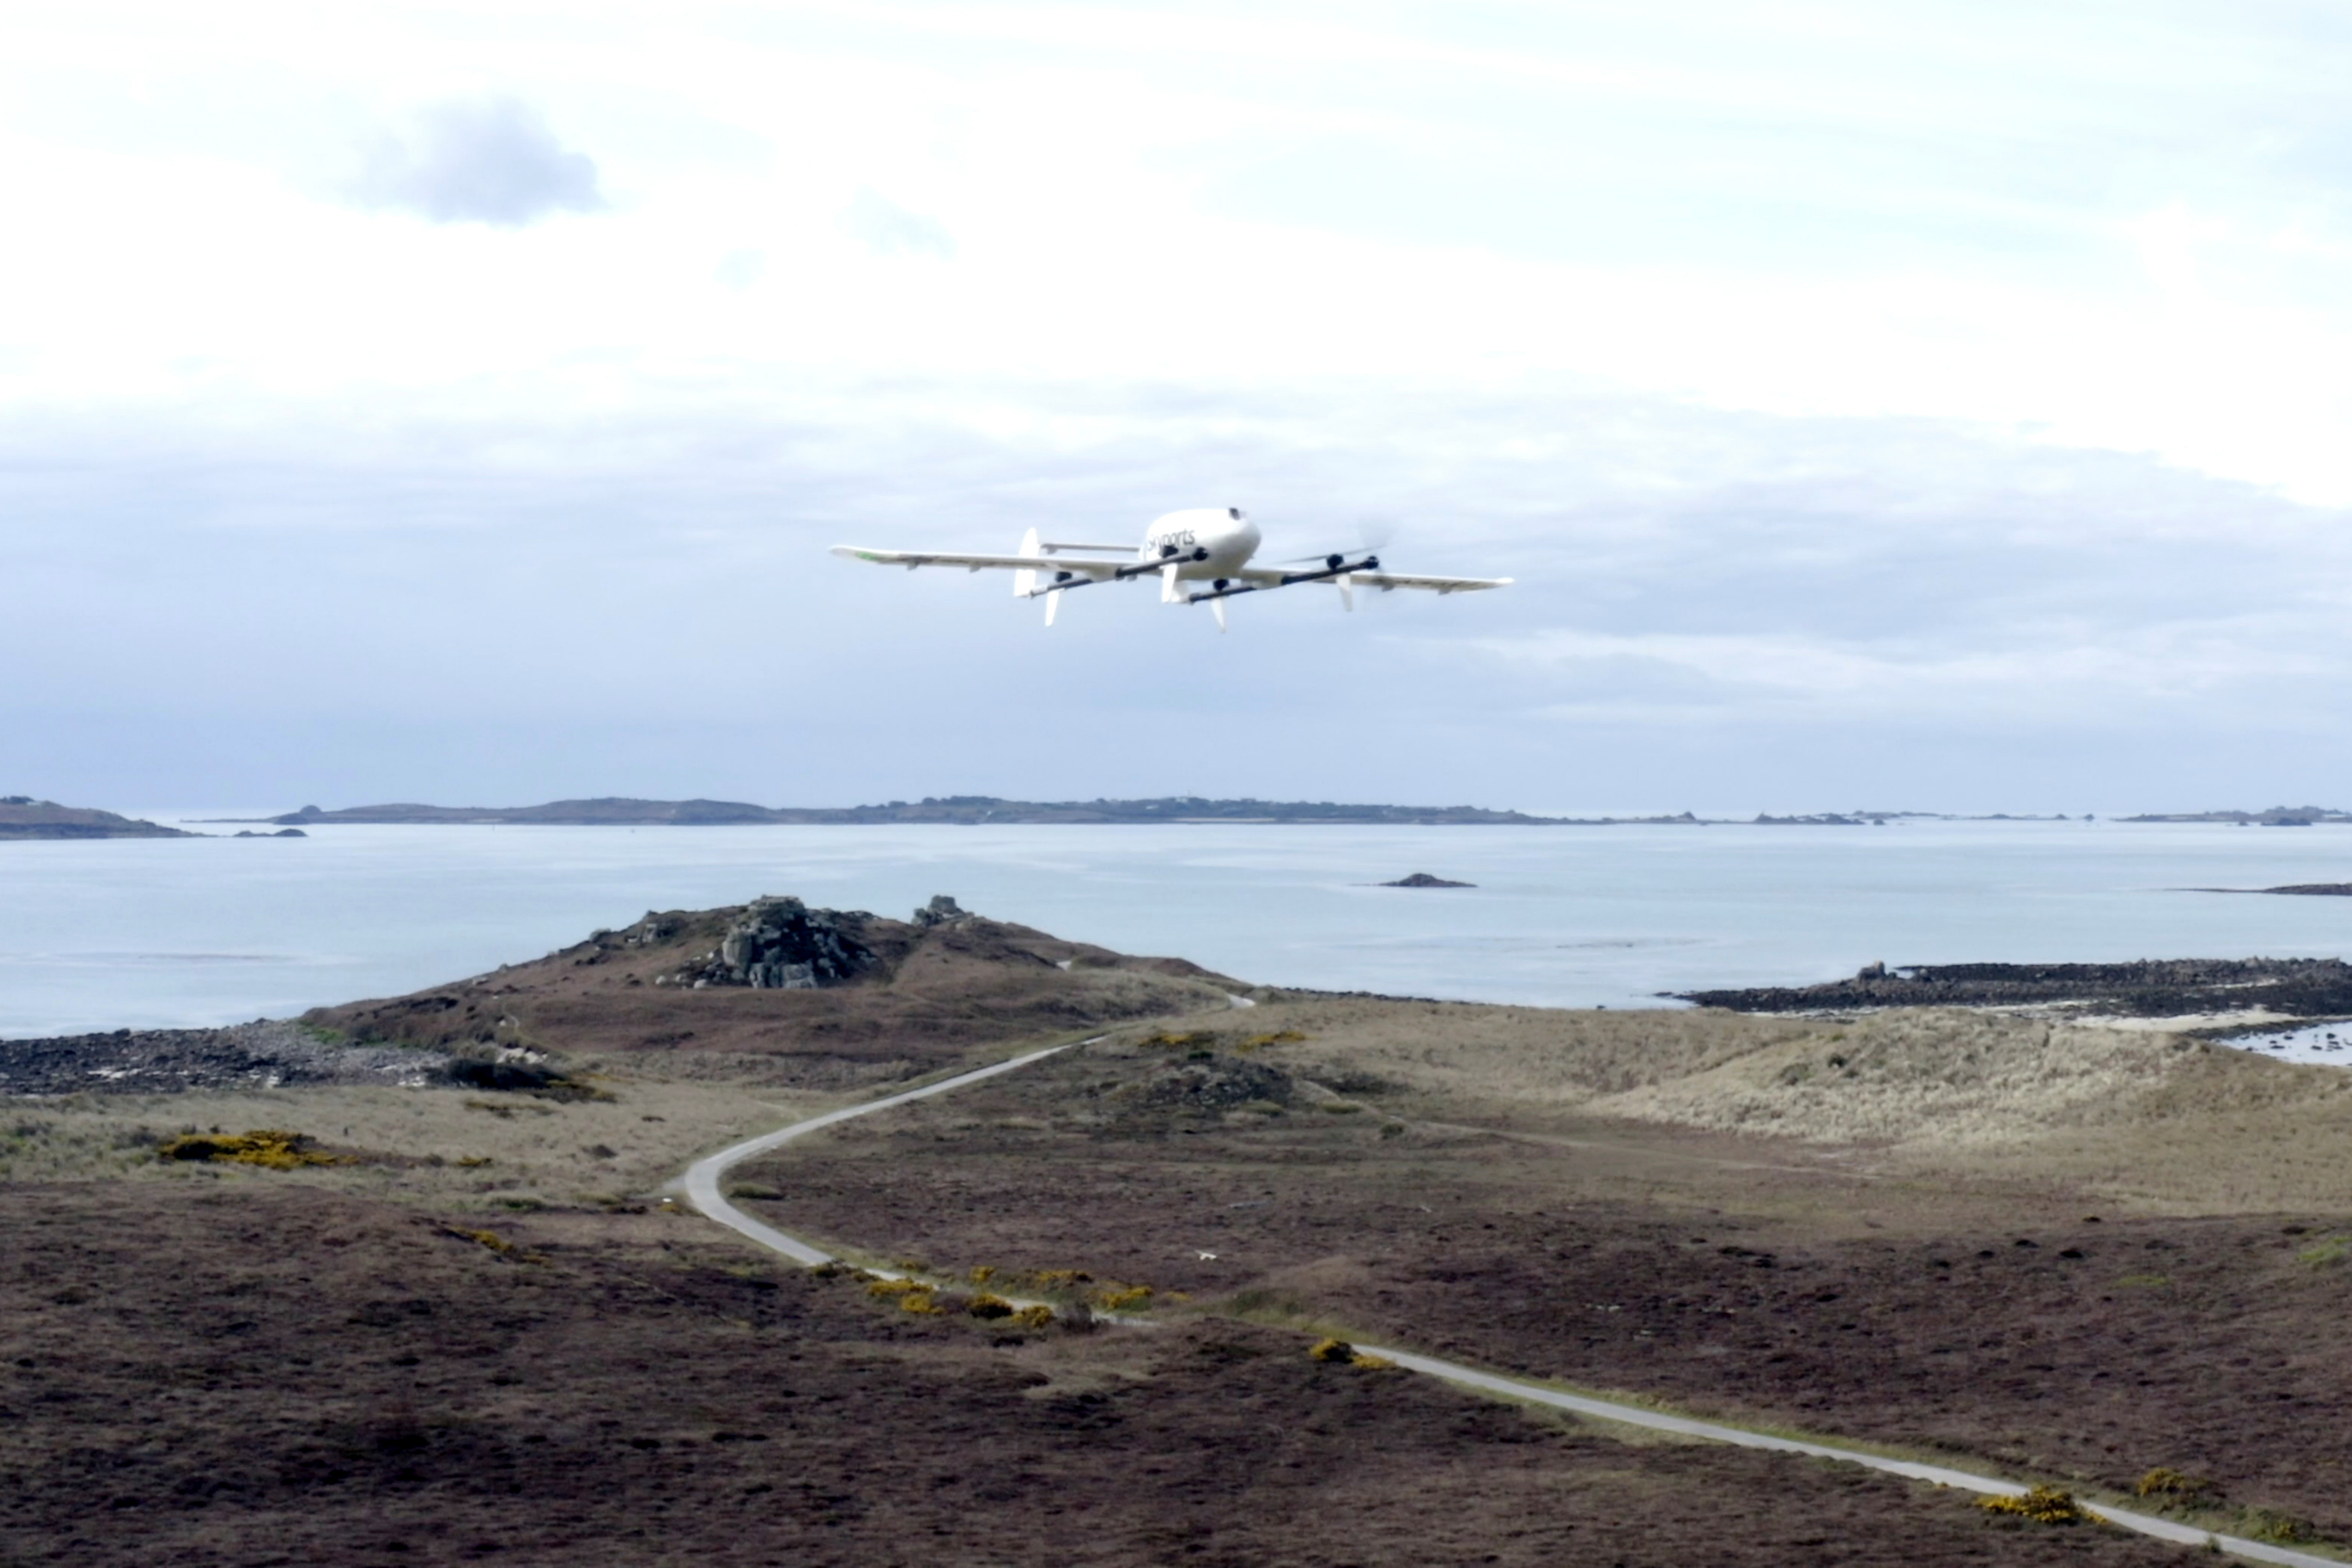 ROYAL MAIL DELIVERS TWO UK FIRSTS WITH AUTONOMOUS DRONE PARCEL DELIVERIES TO THE SCILLY ISLES ALONGSIDE INTER-ISLAND DRONE DELIVERIES OF TEST KITS